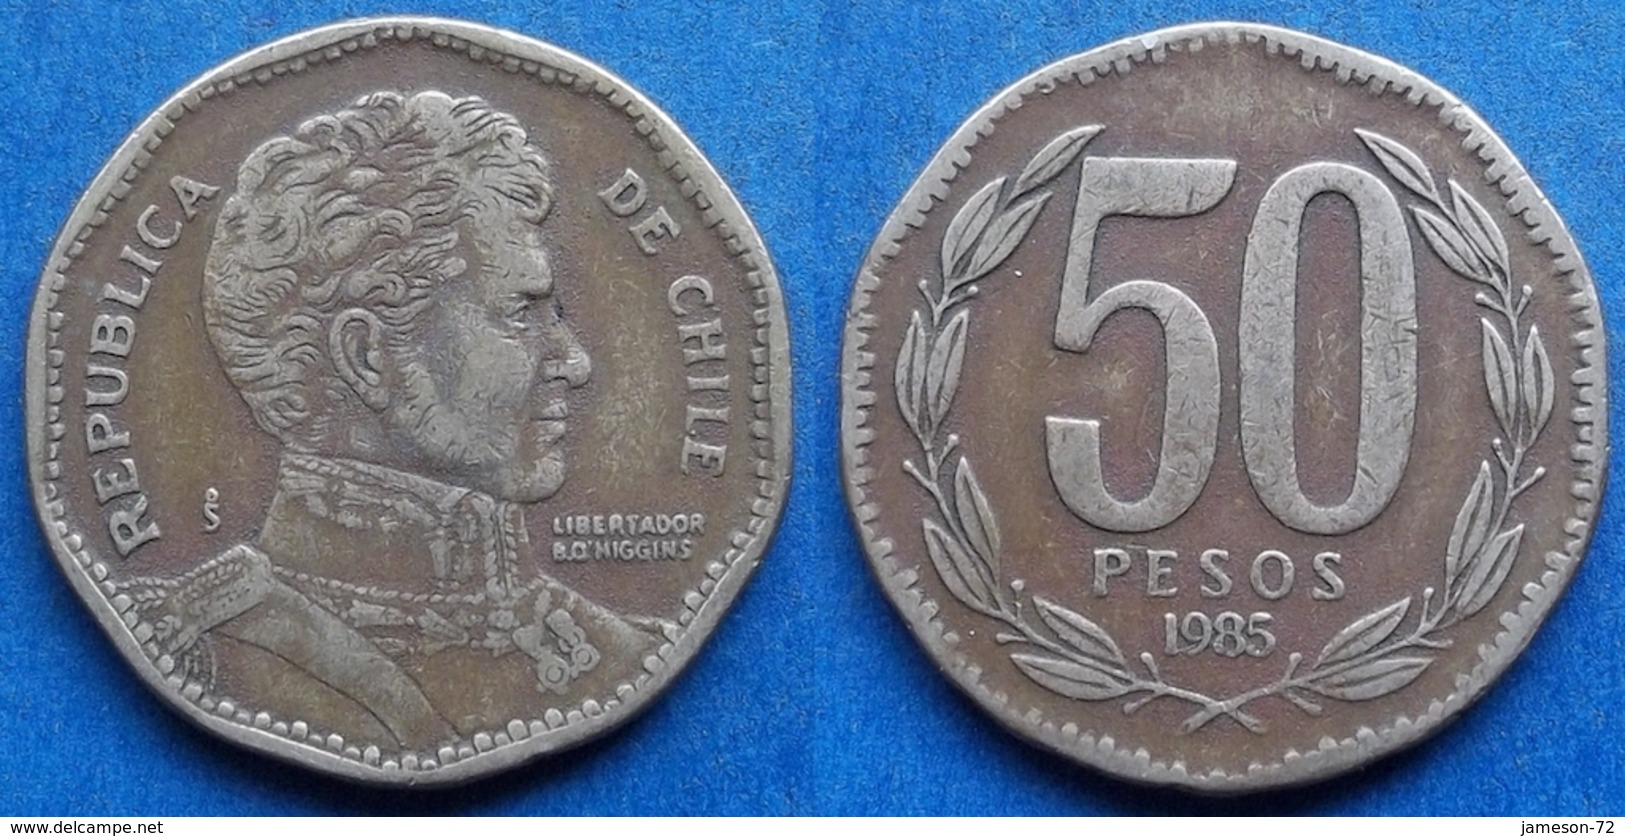 CHILE - 50 Pesos 1985 KM# 219.1 Monetary Reform (1975) America - Edelweiss Coins - Chile